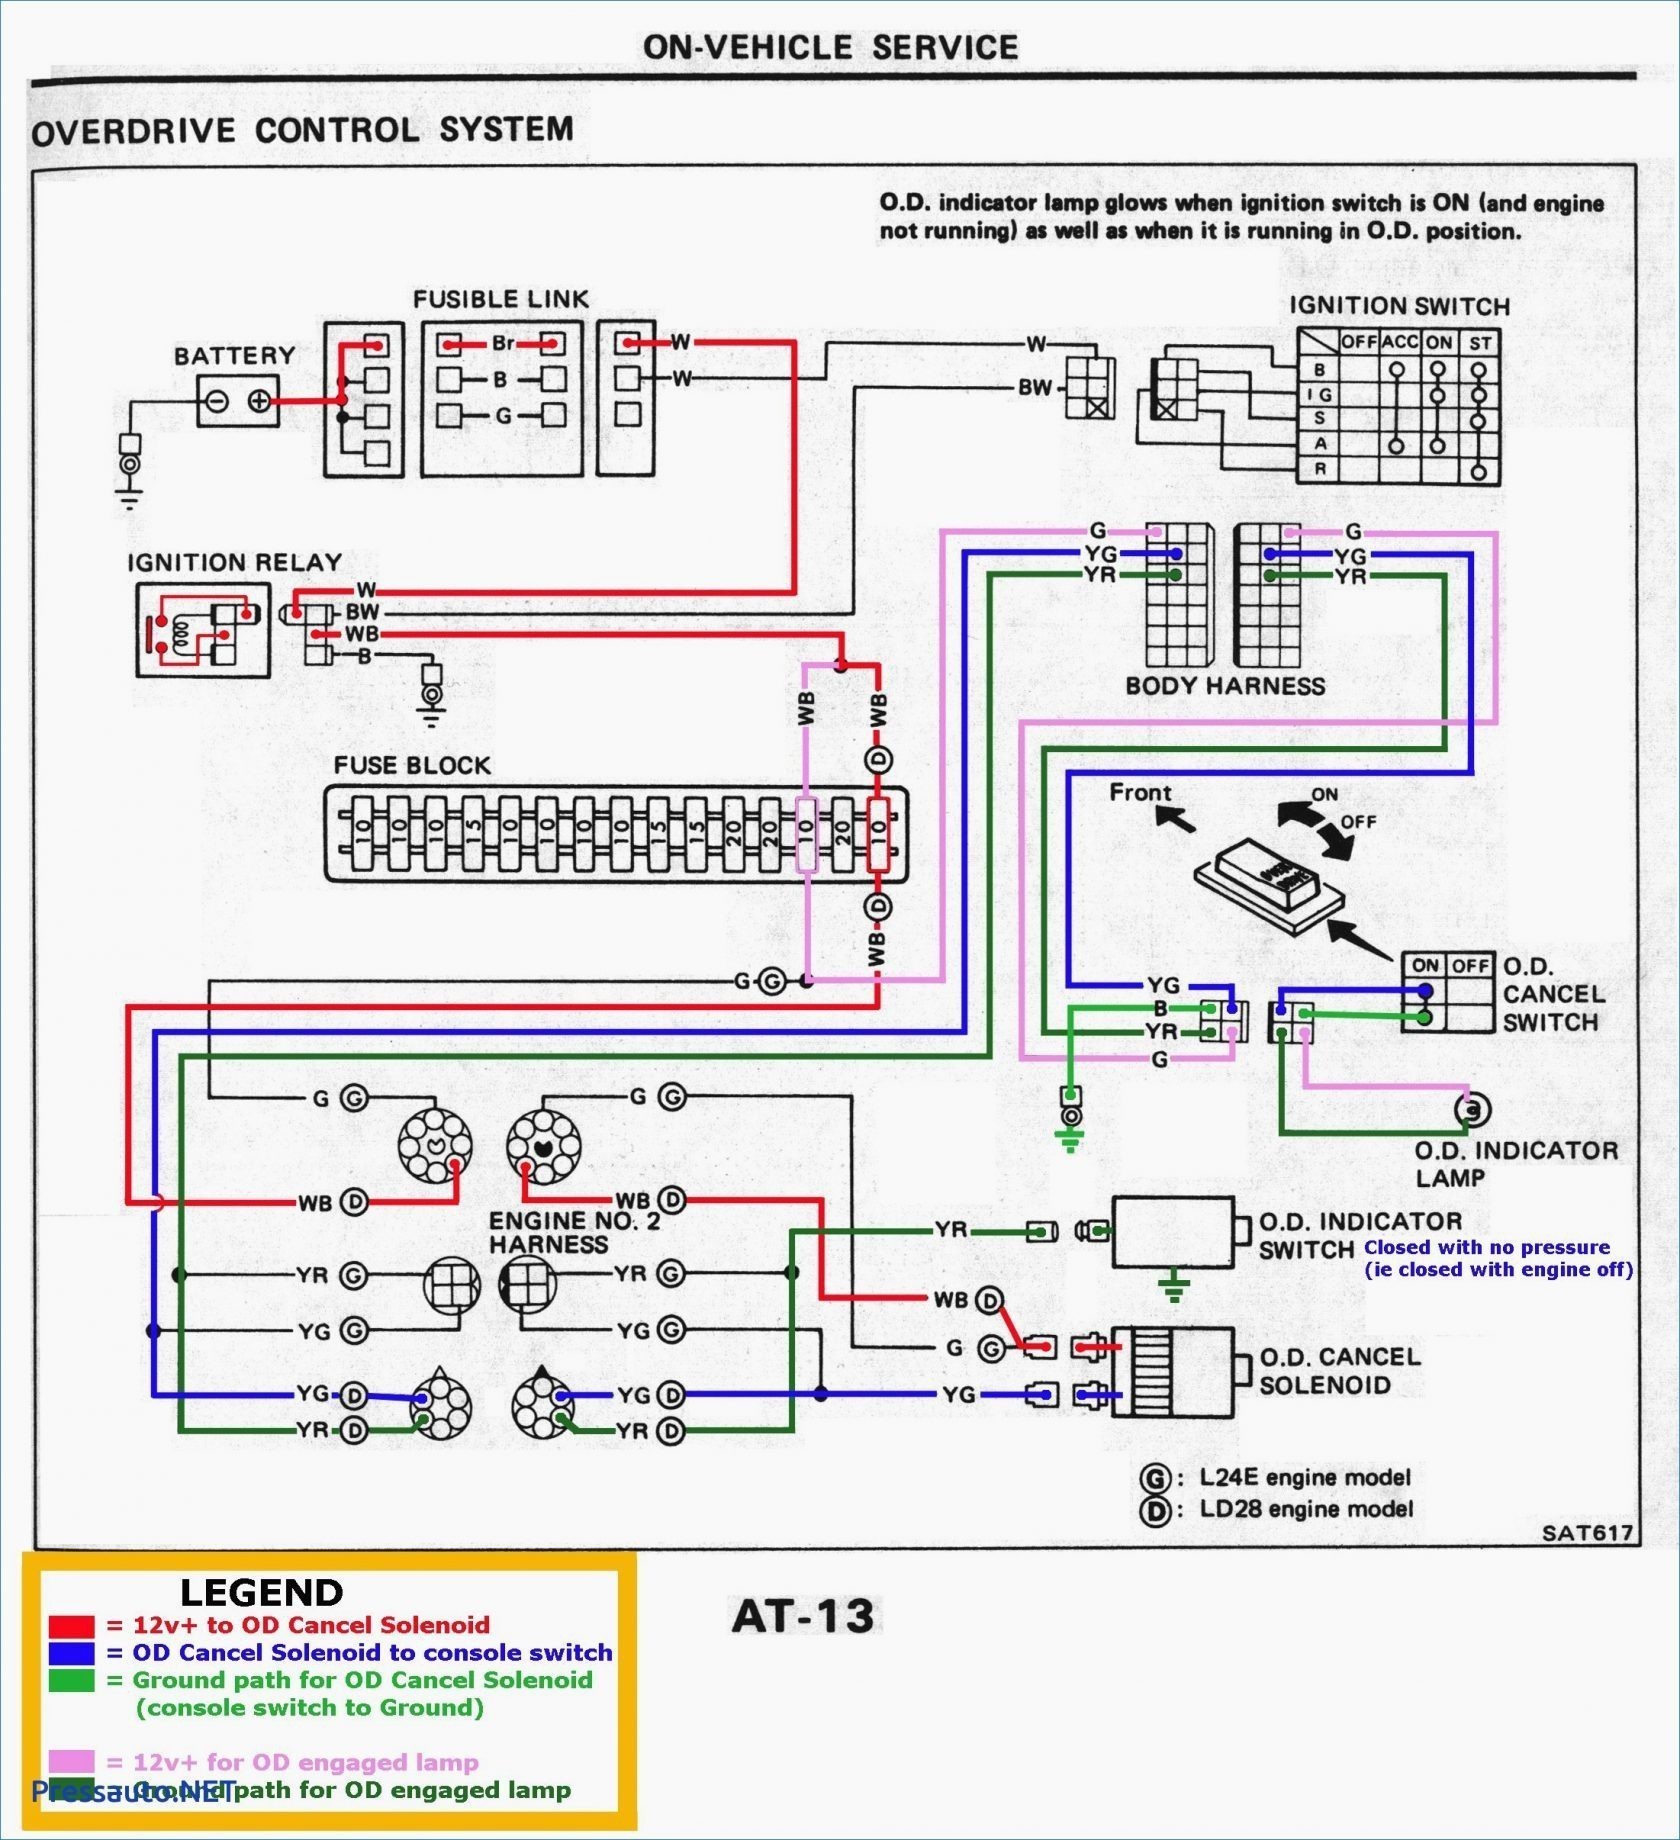 Wiring Diagram for 350 Chevy Engine Bose Wiring Diagrams